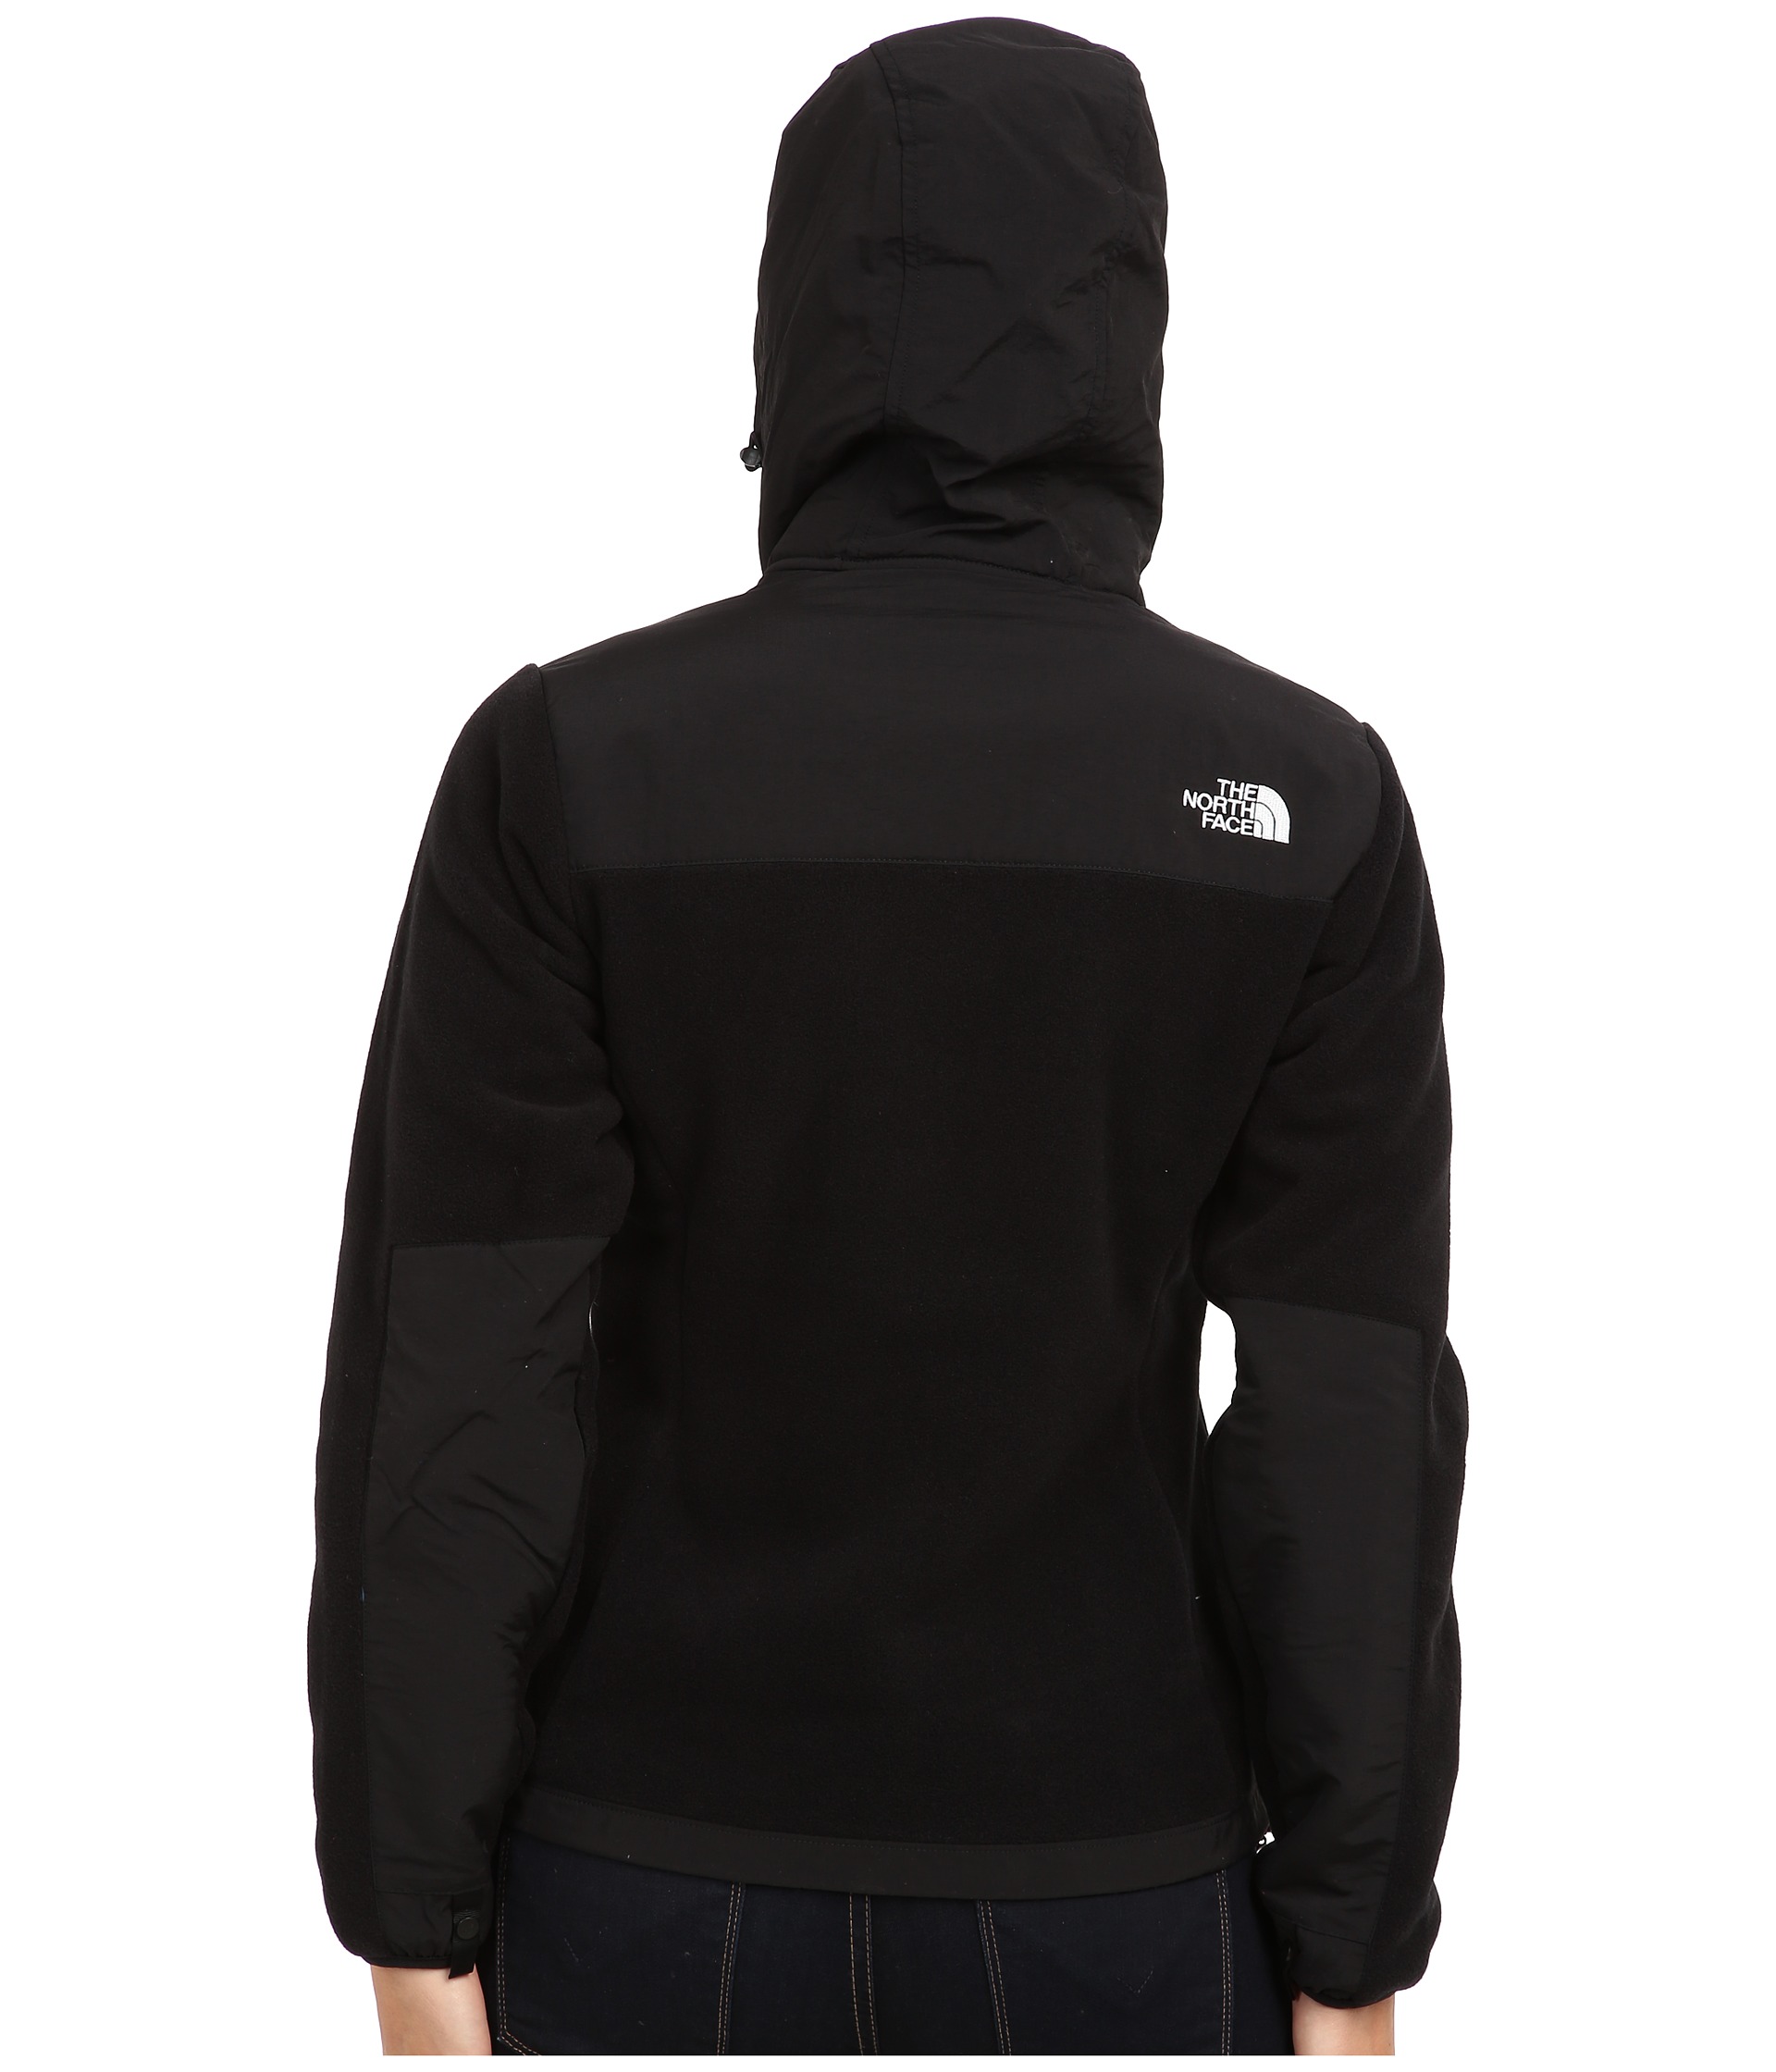 The North Face Denali Hoodie - Zappos.com Free Shipping BOTH Ways